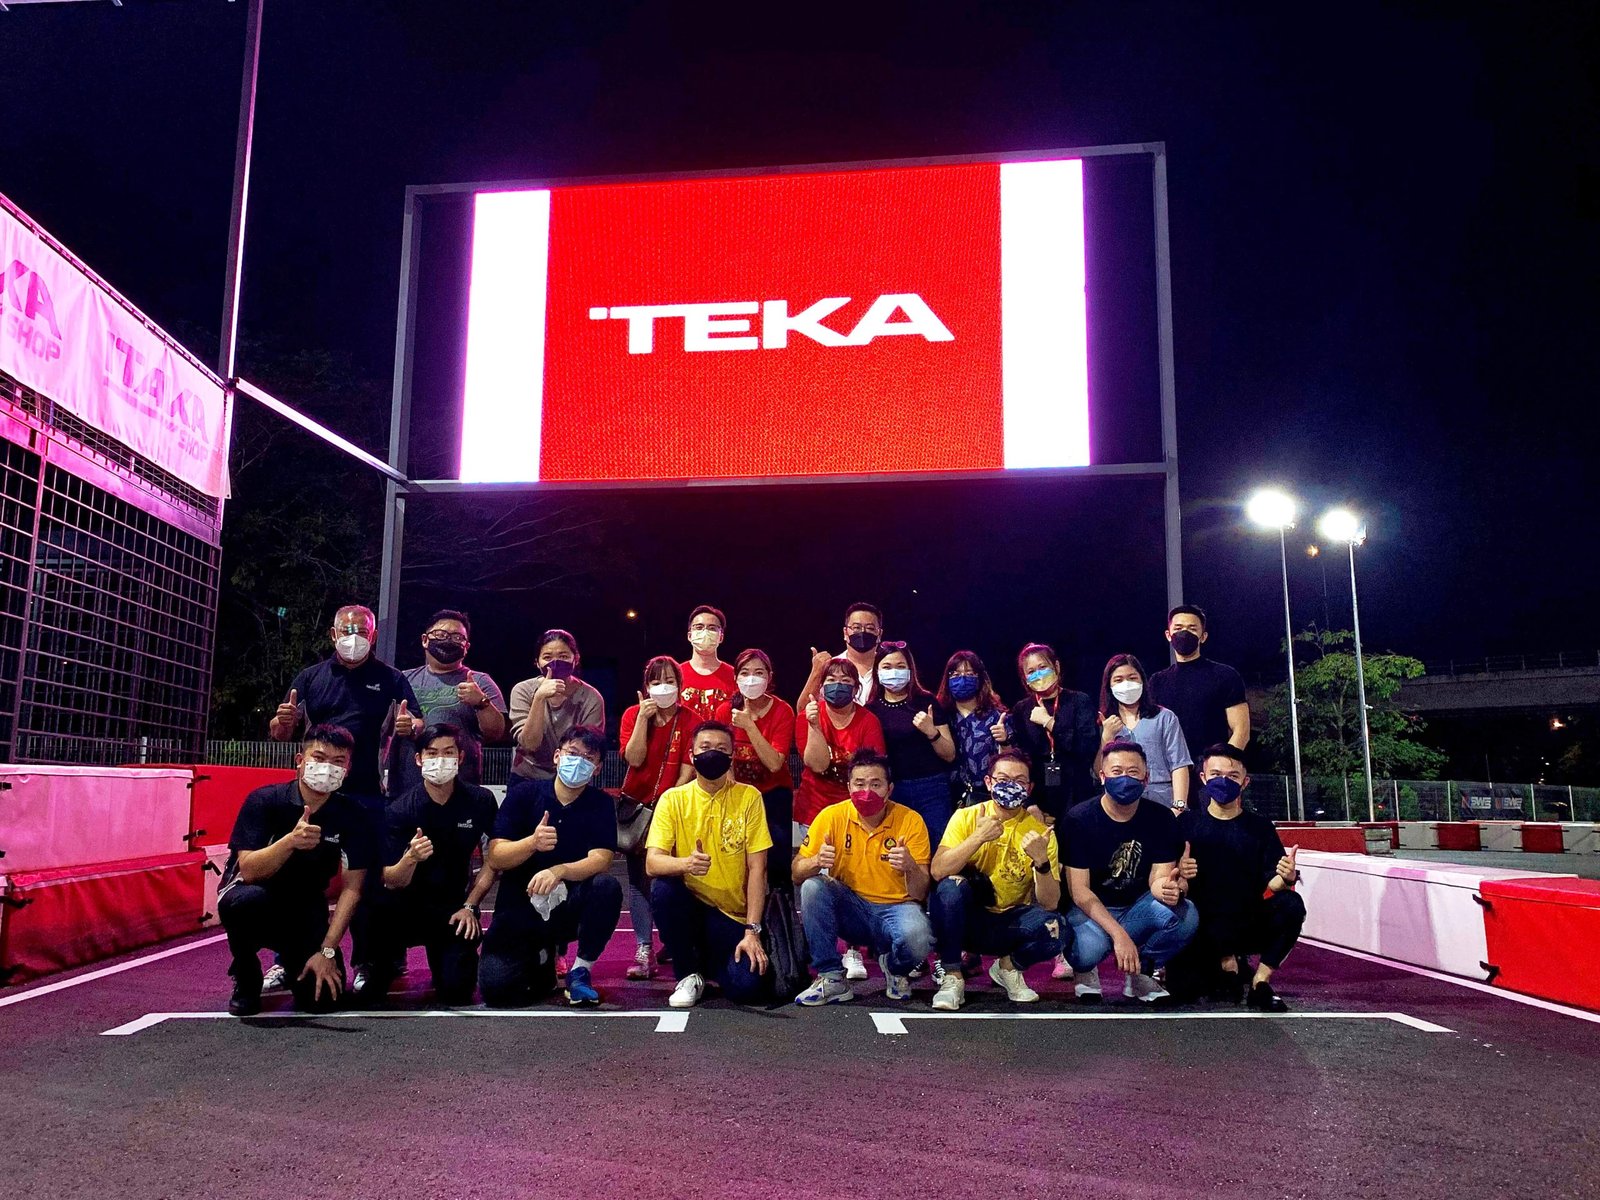 Morac Go Kart Track 1 Utama corporate event image with the members posing under the LED board. Their company logo is displayed on the board.